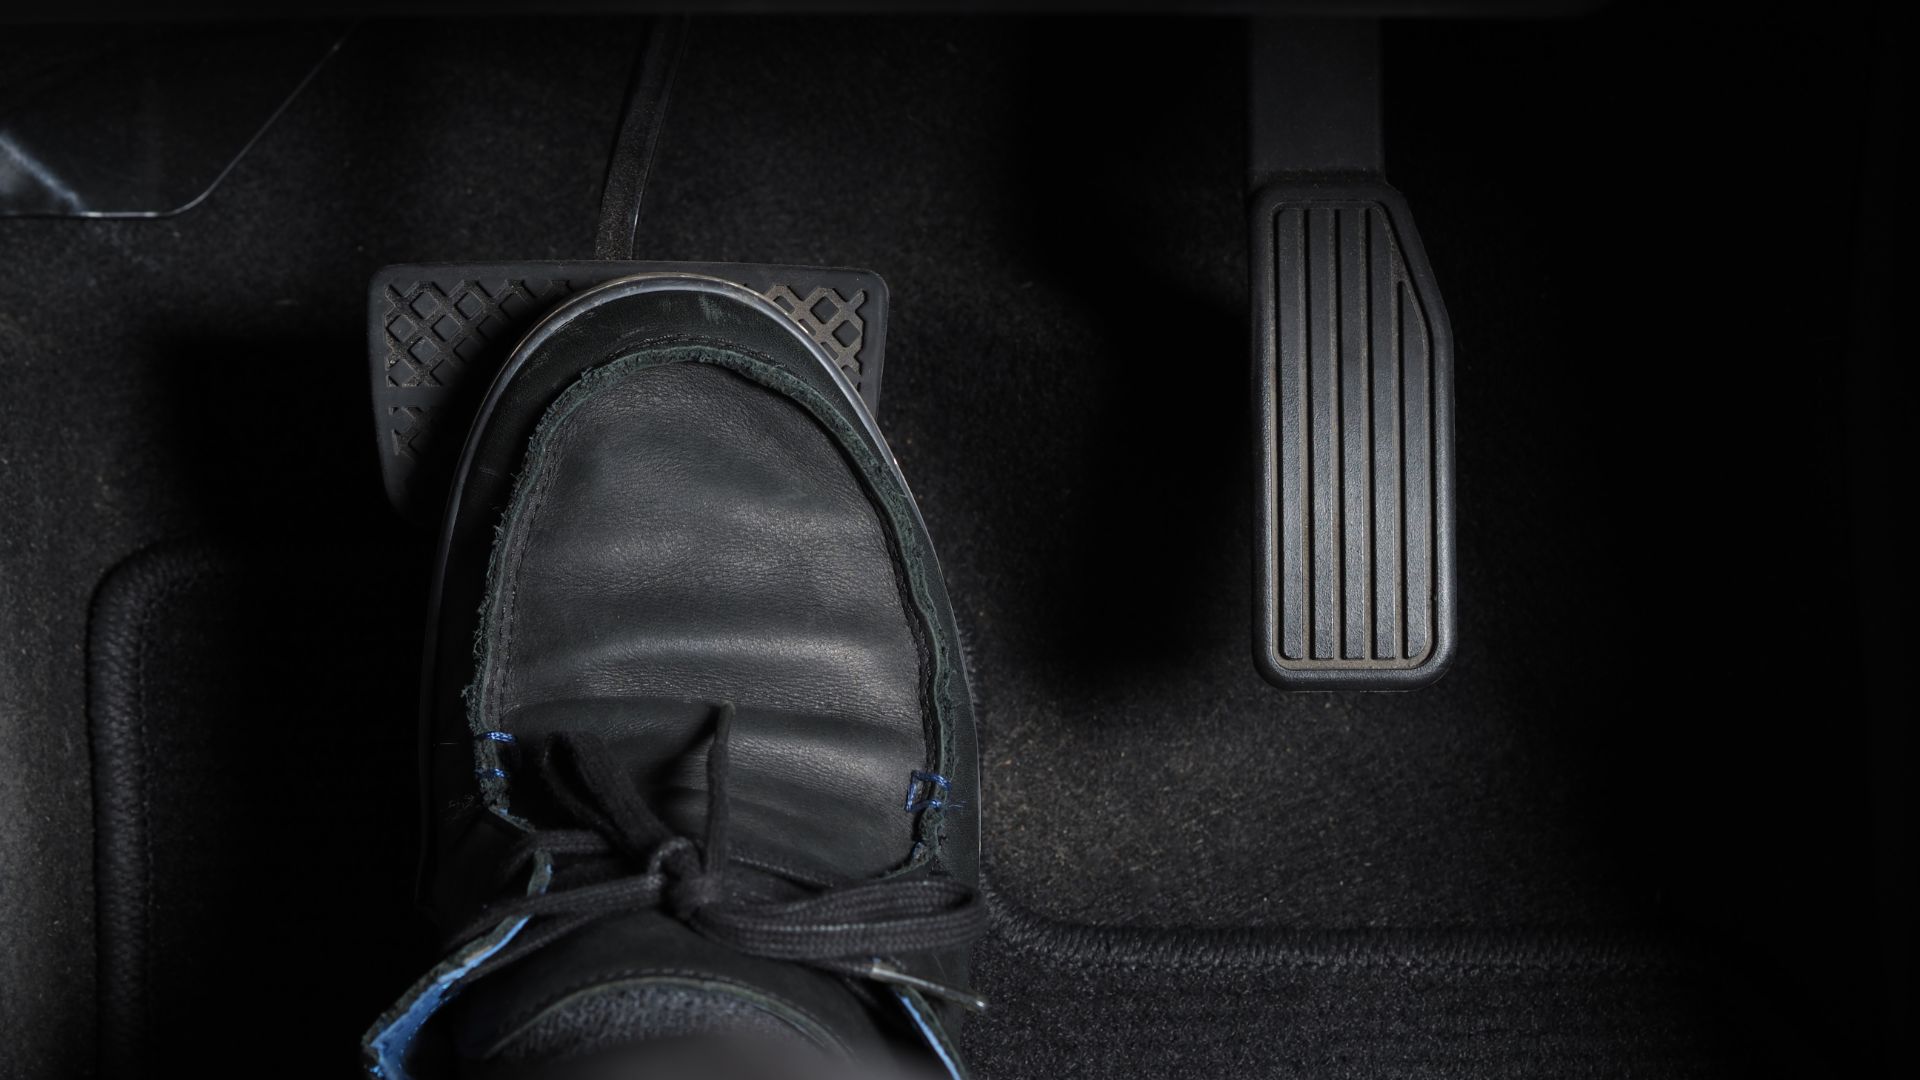 a pair of shoes sitting on the floor of a car.